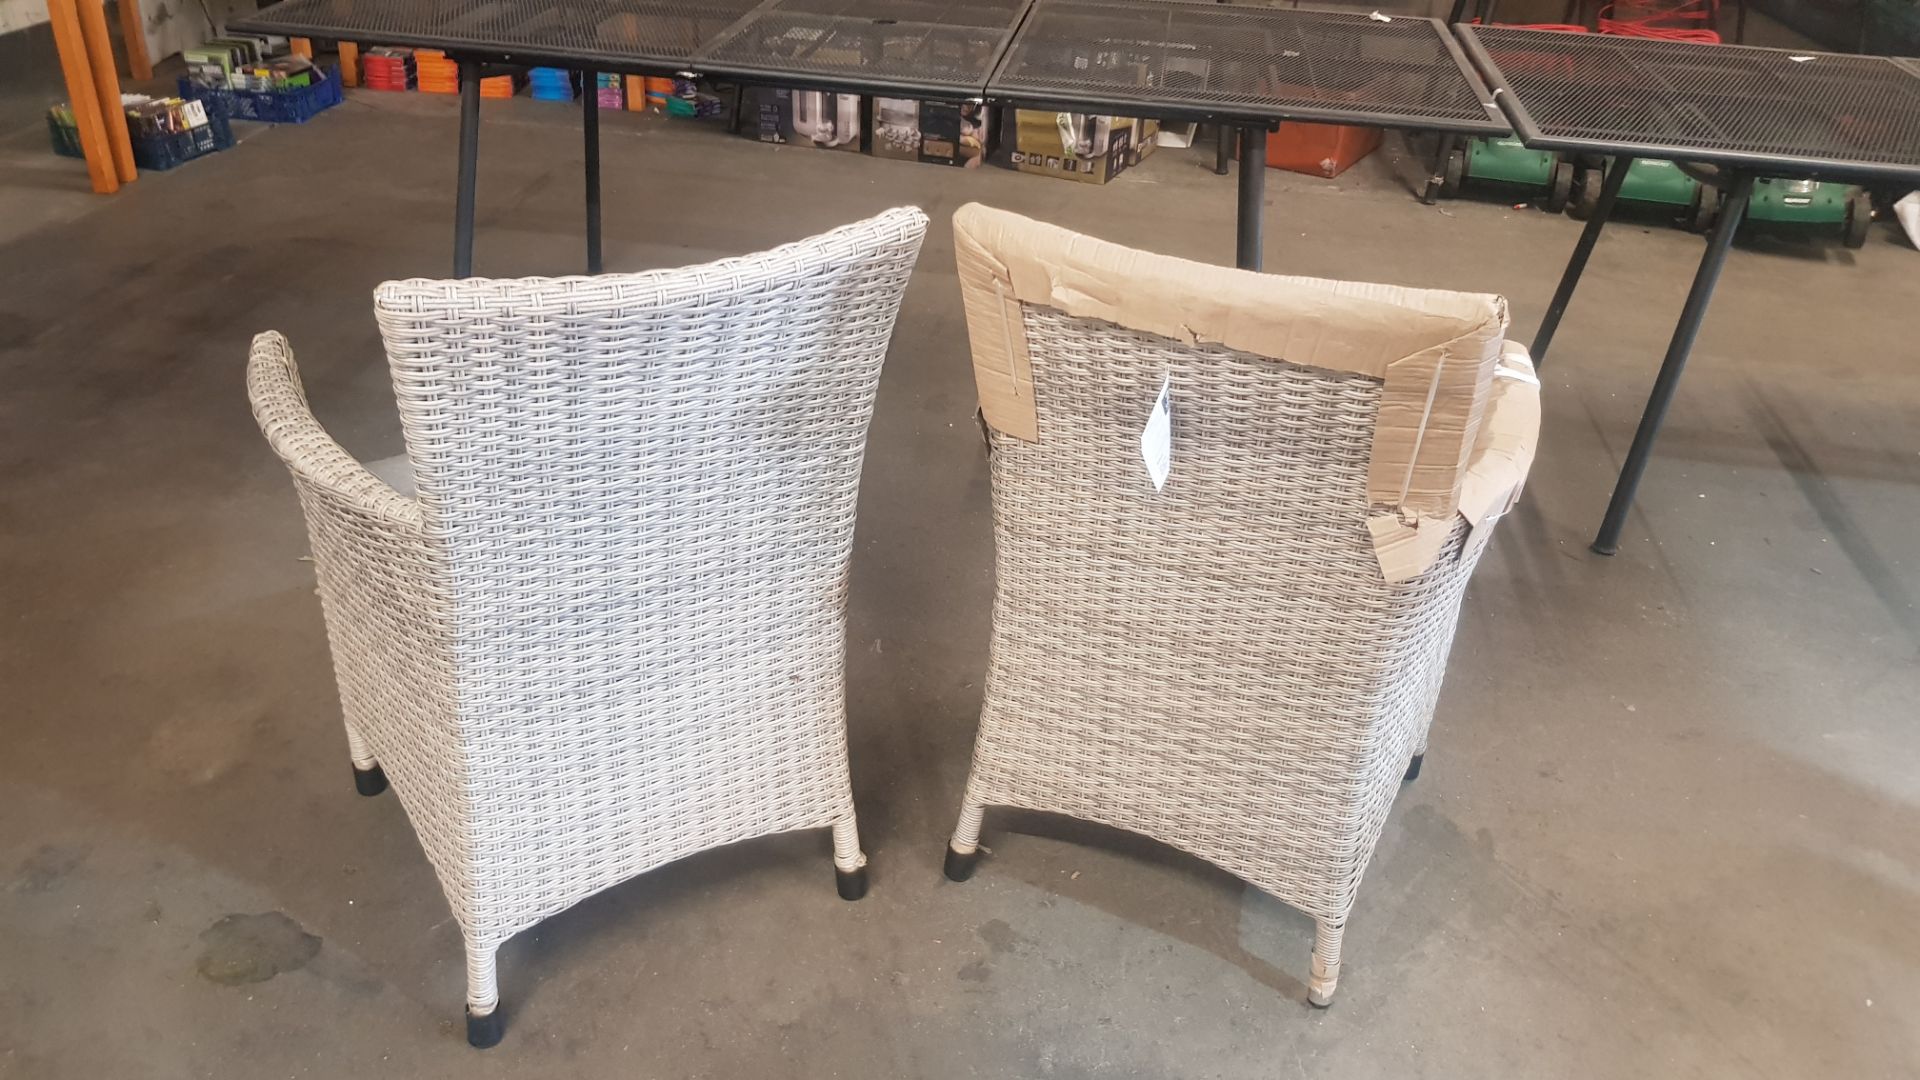 (15) 2x Hartington Florence Collection Rattan Dining Chair With 2x Cushions. (1x In Original Packag - Image 4 of 4